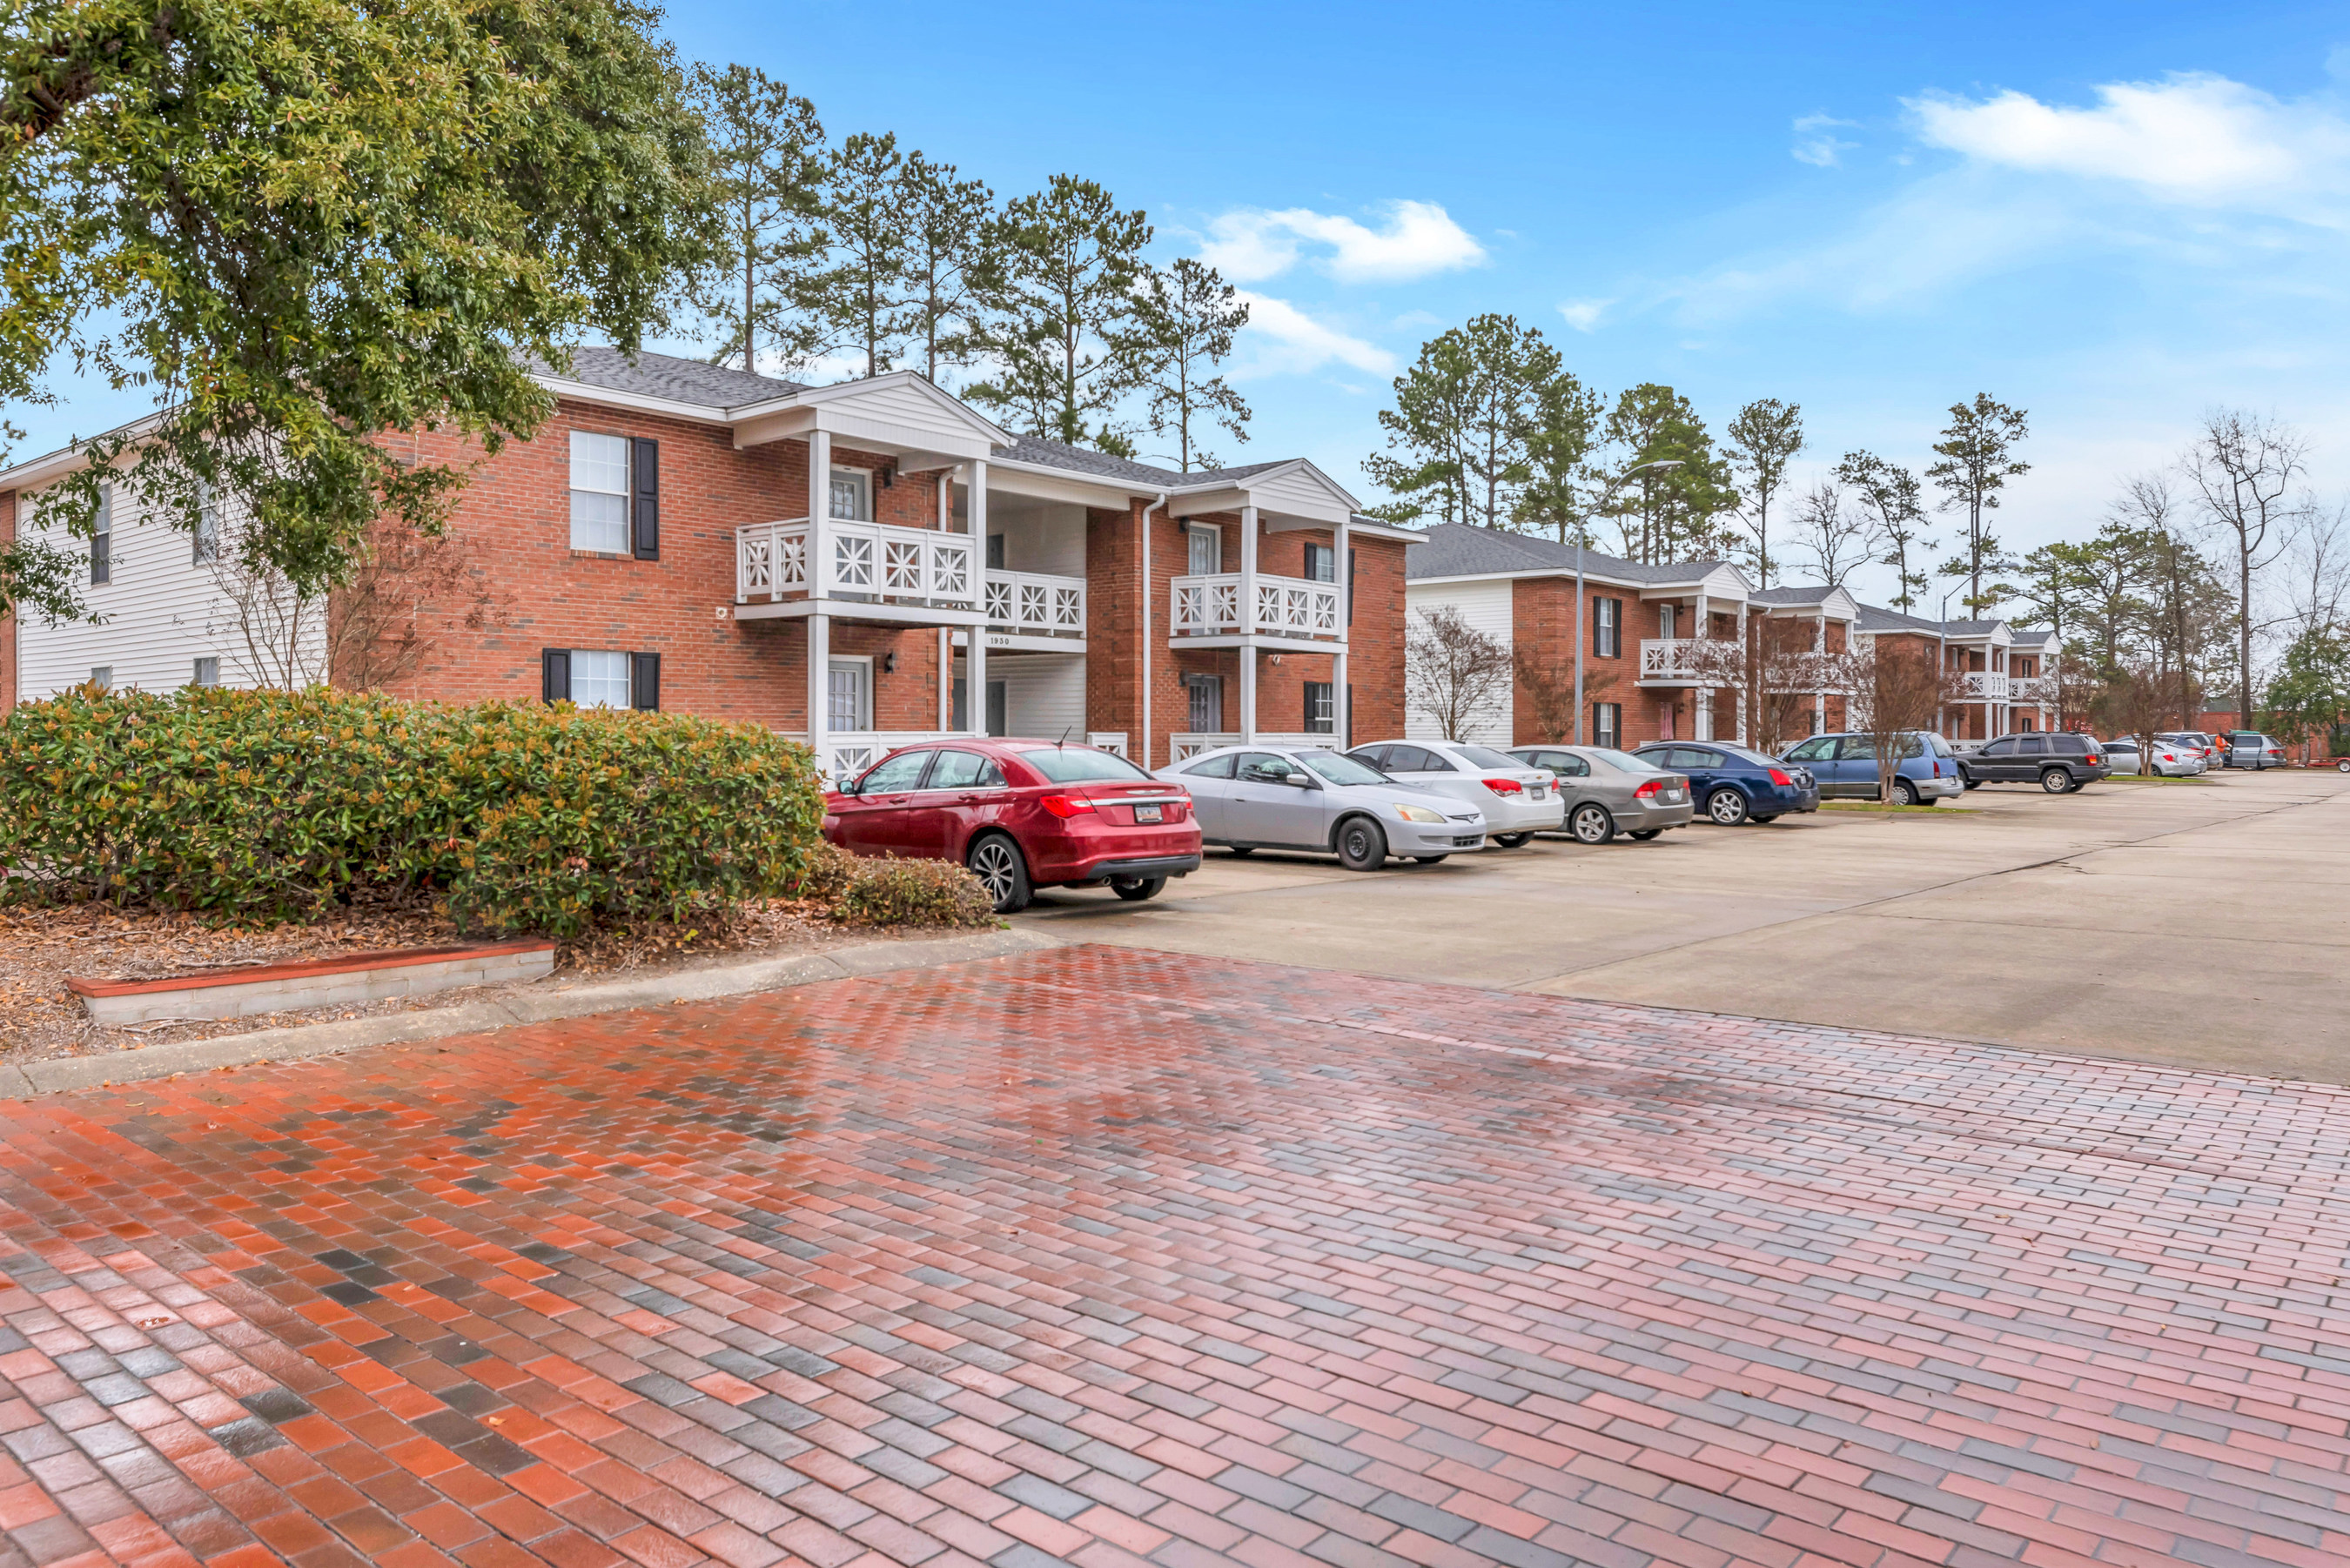 Three Oaks Management and Partners Acquire Waterforde Place Apartment Community in Heart of Sumter, South Carolina